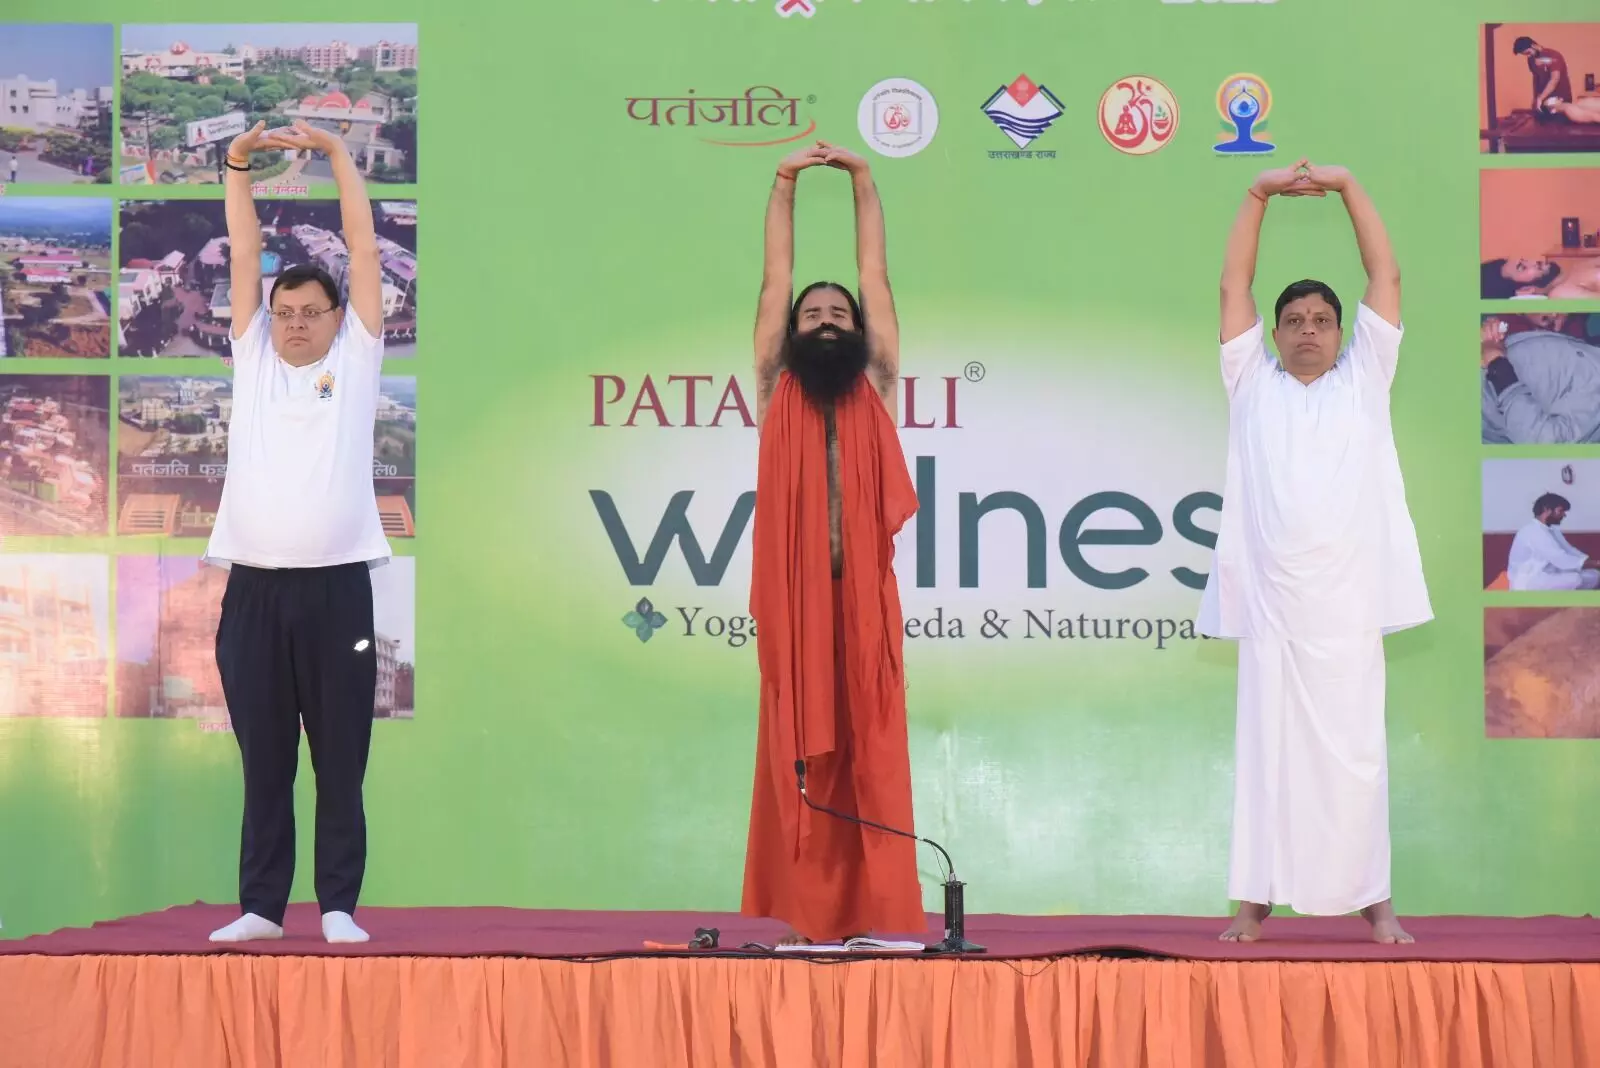 Yoga for All: Swami Ramdev and 20,000 Yogis Spreading the Message on International Day of Yoga